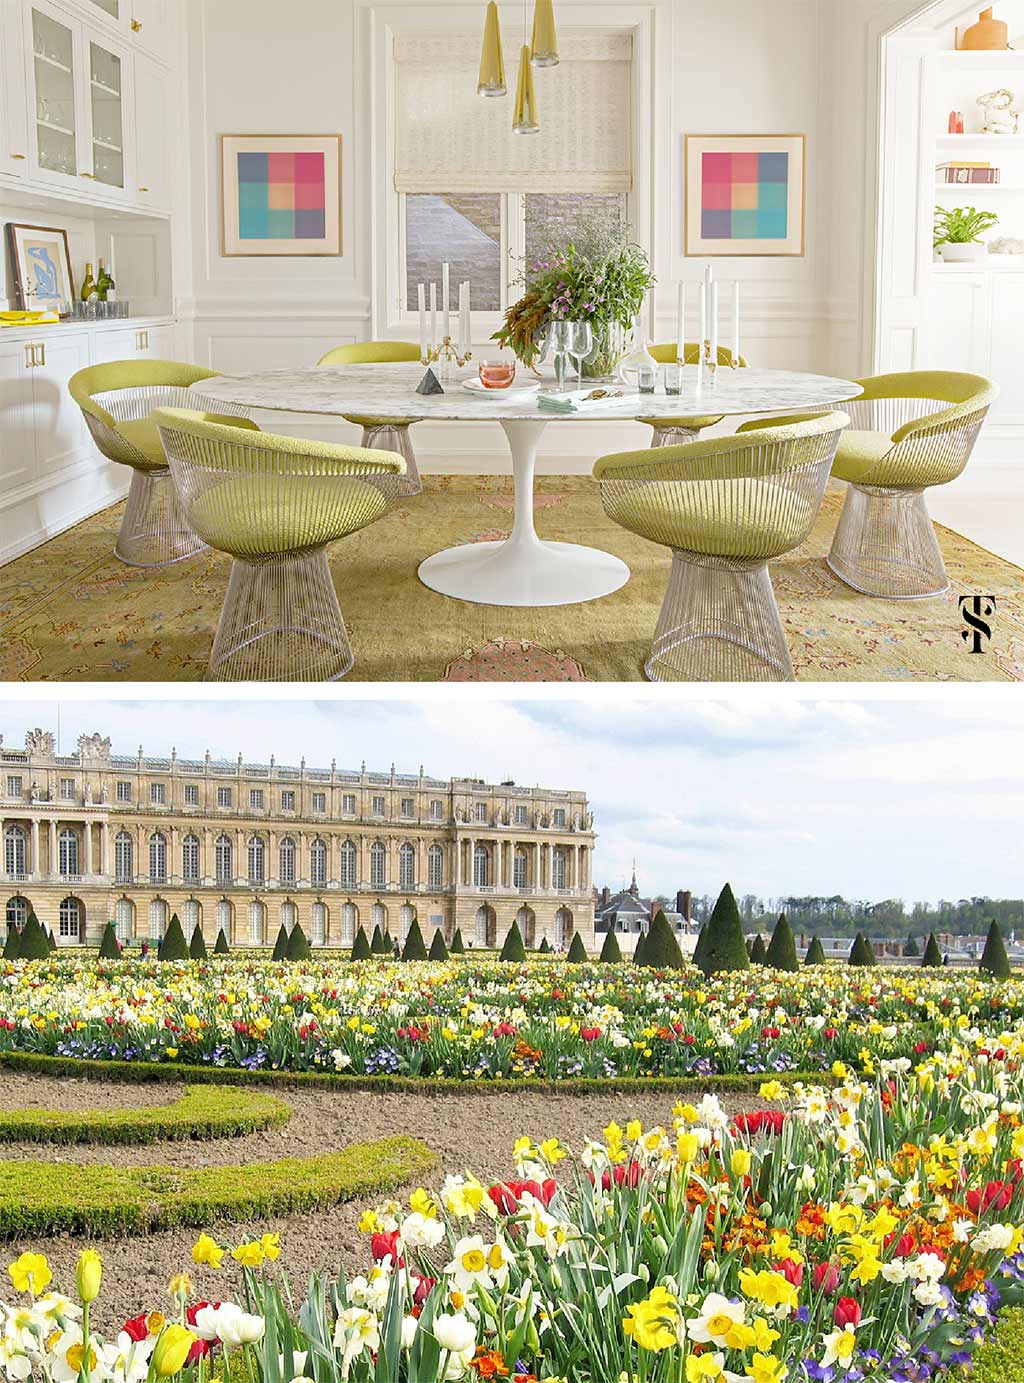 Lincoln Park dining room, chartreuse, by Summer Thornton Design. Gardens at Chateau de Versailles, France, daffodils, tulips, trees, Trover, Mark Rentz.